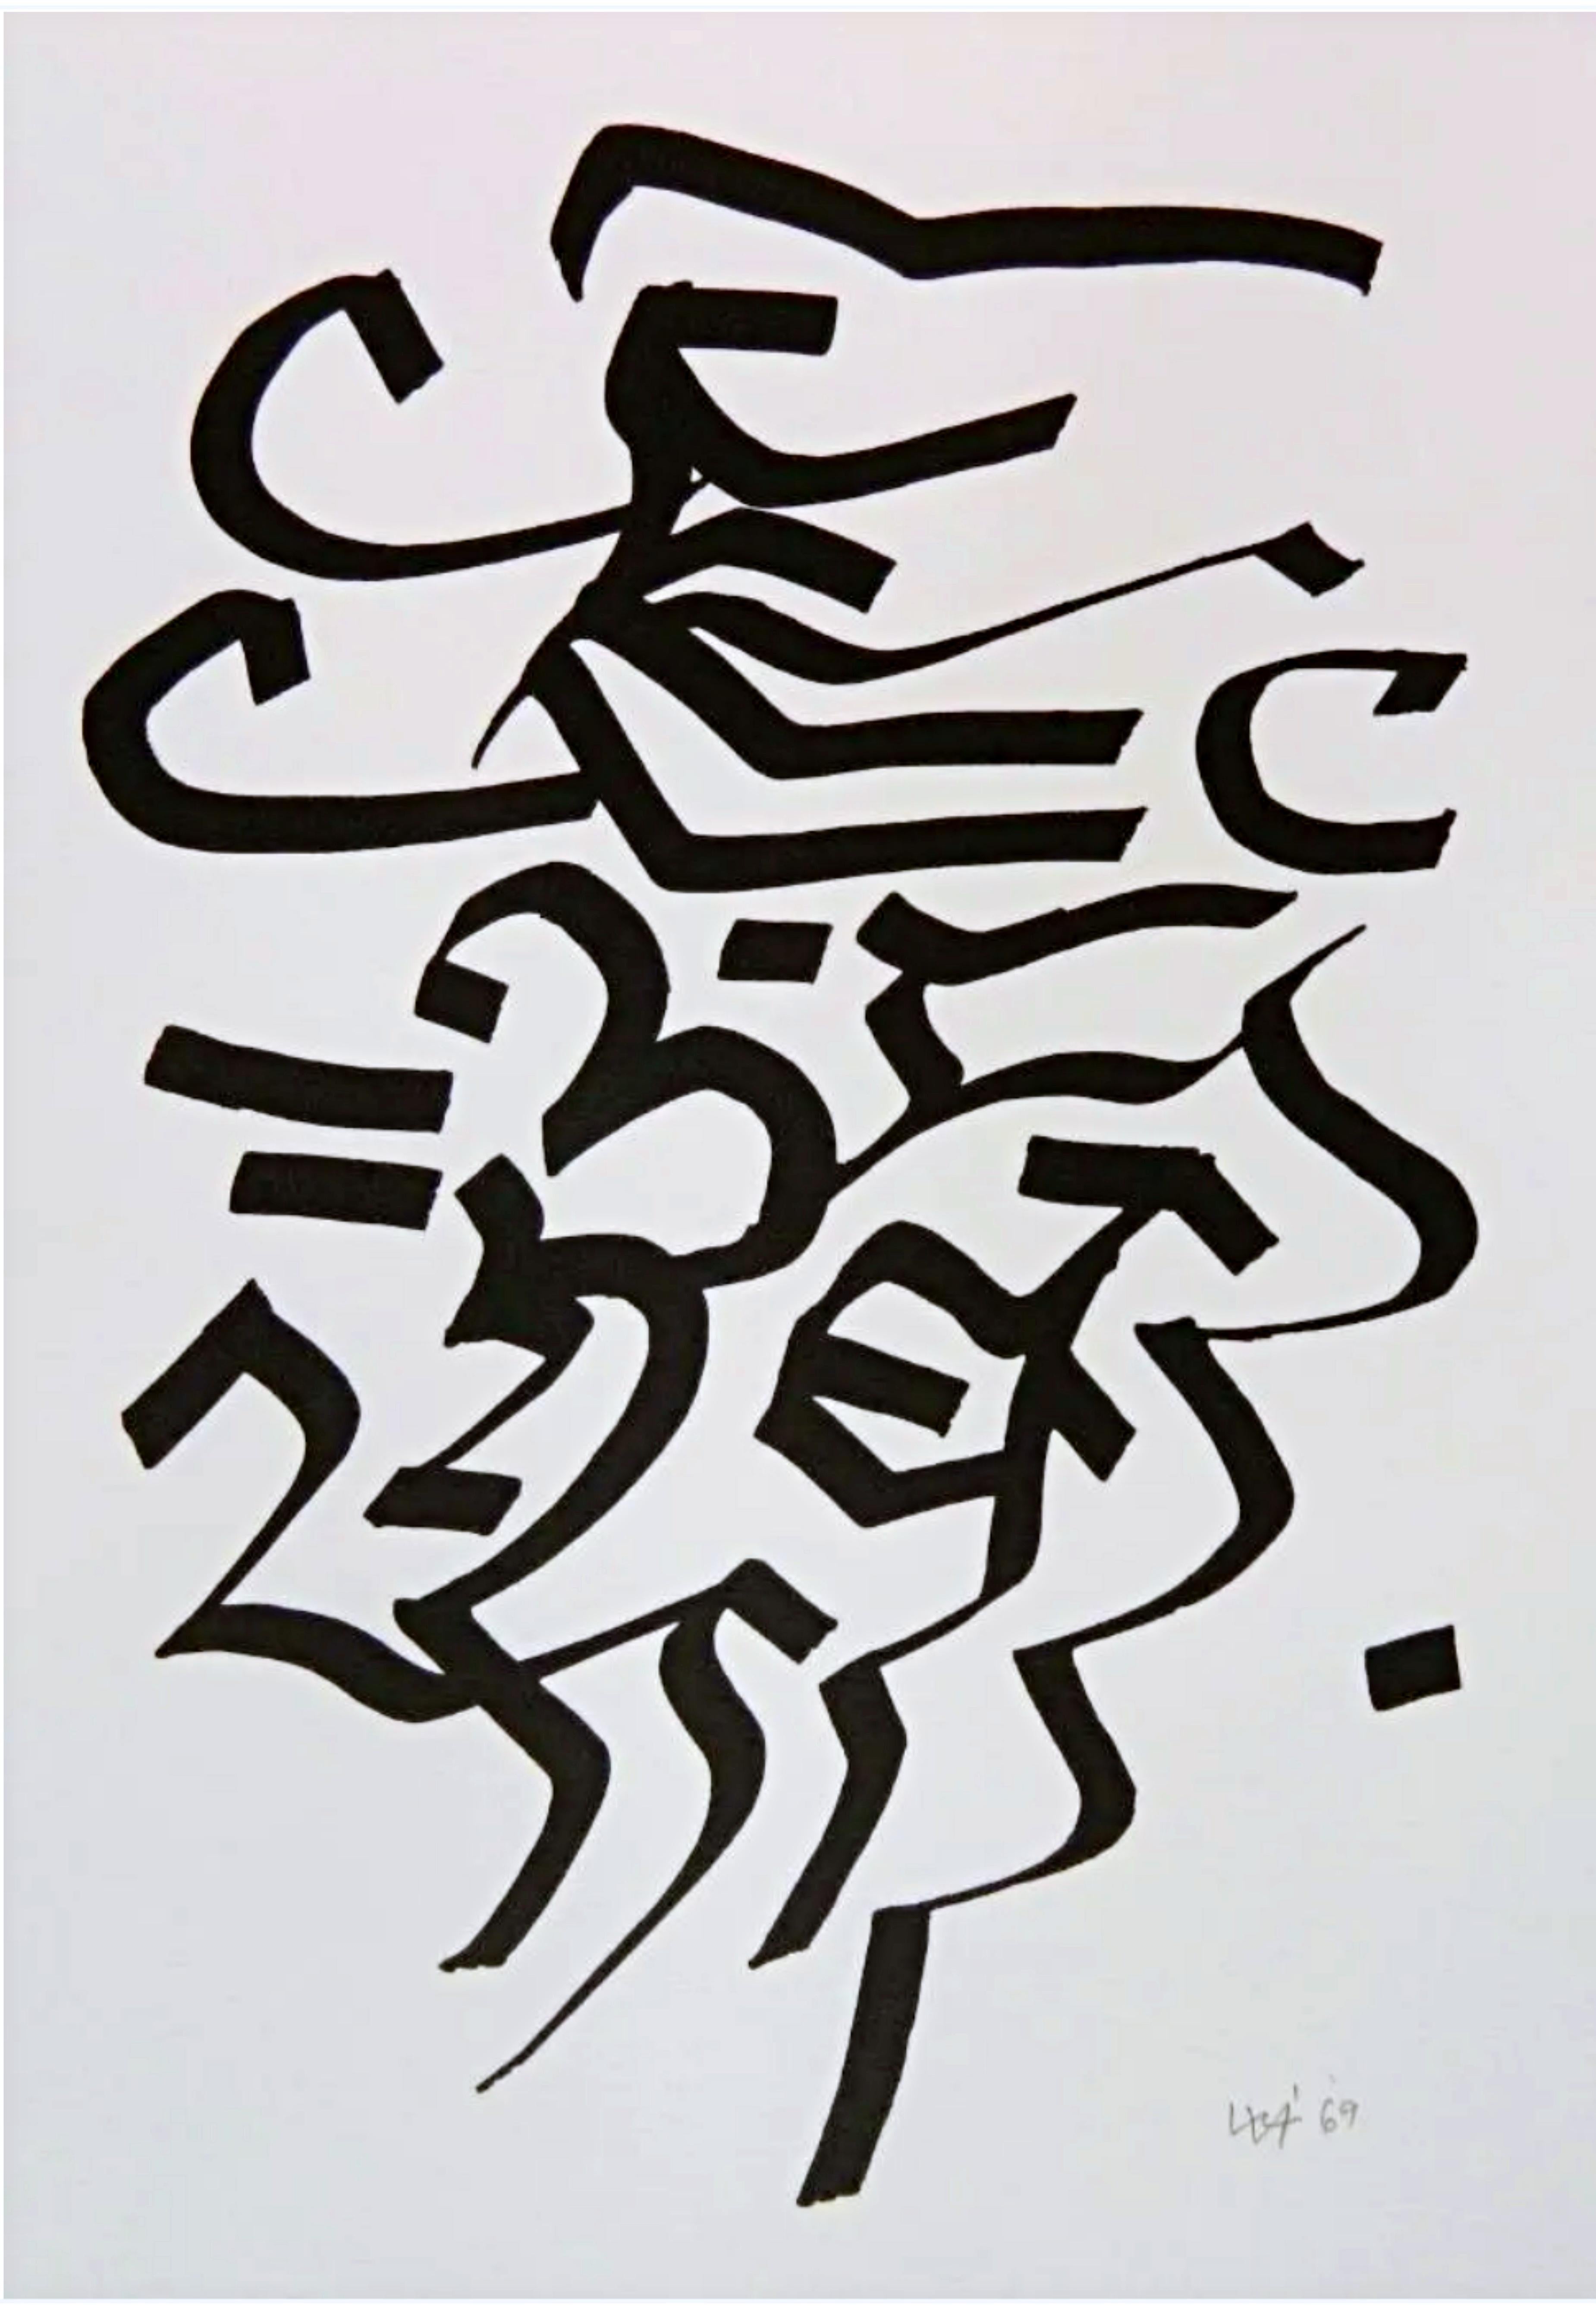 Calligraphy  (Mid Century Modern Abstraction)